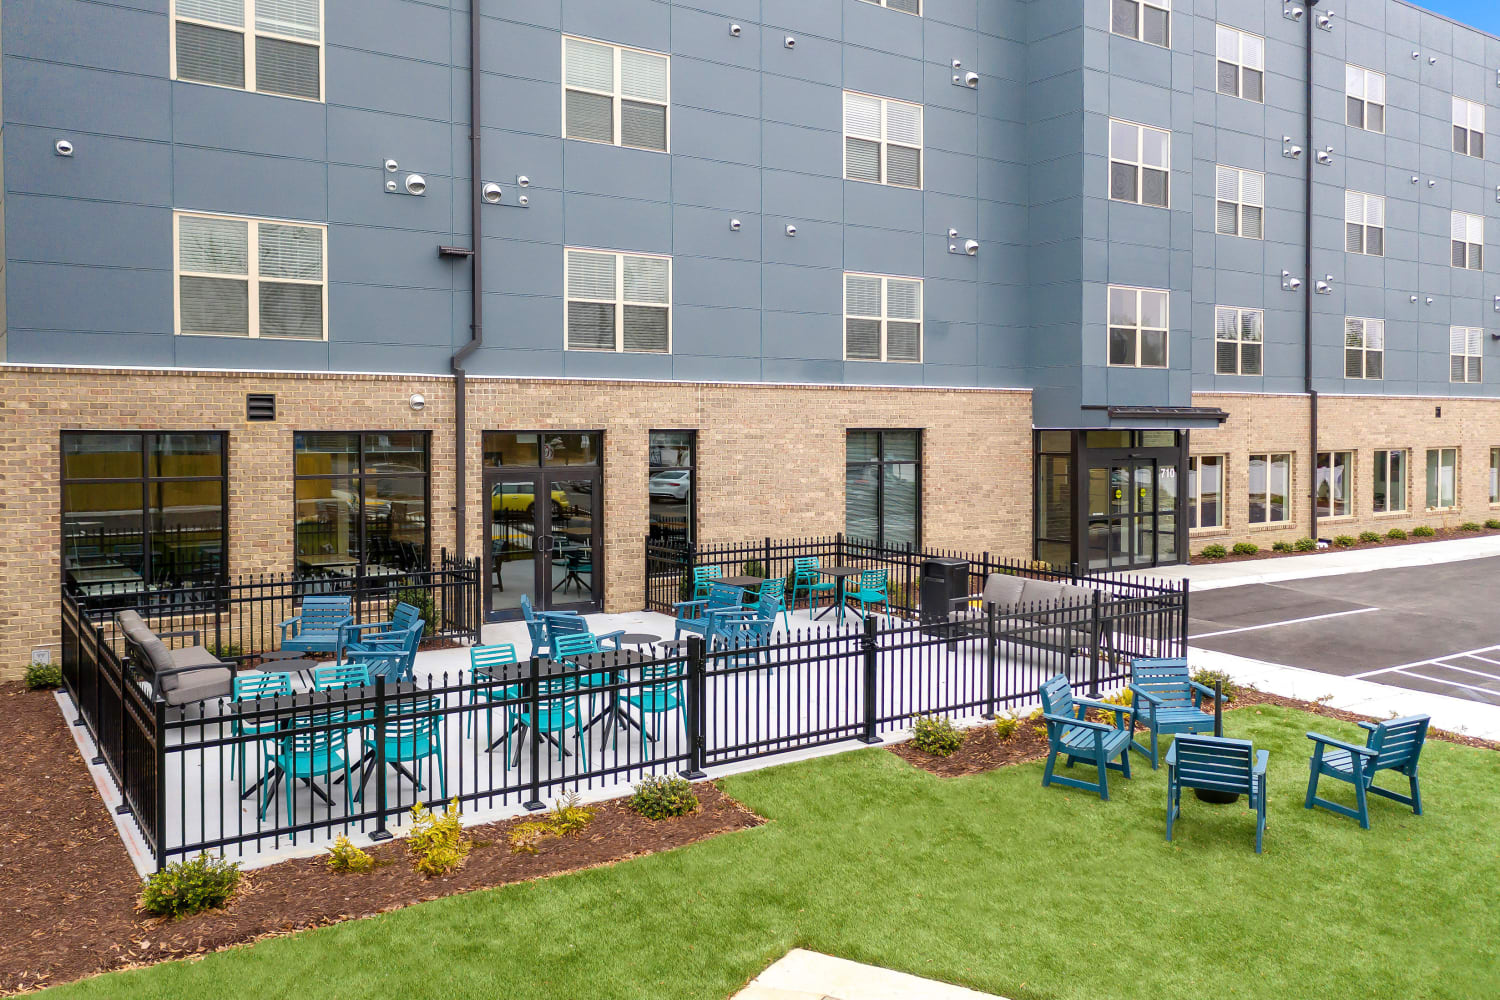 Outdoor seating at The Concord Northside in Richmond, Virginia